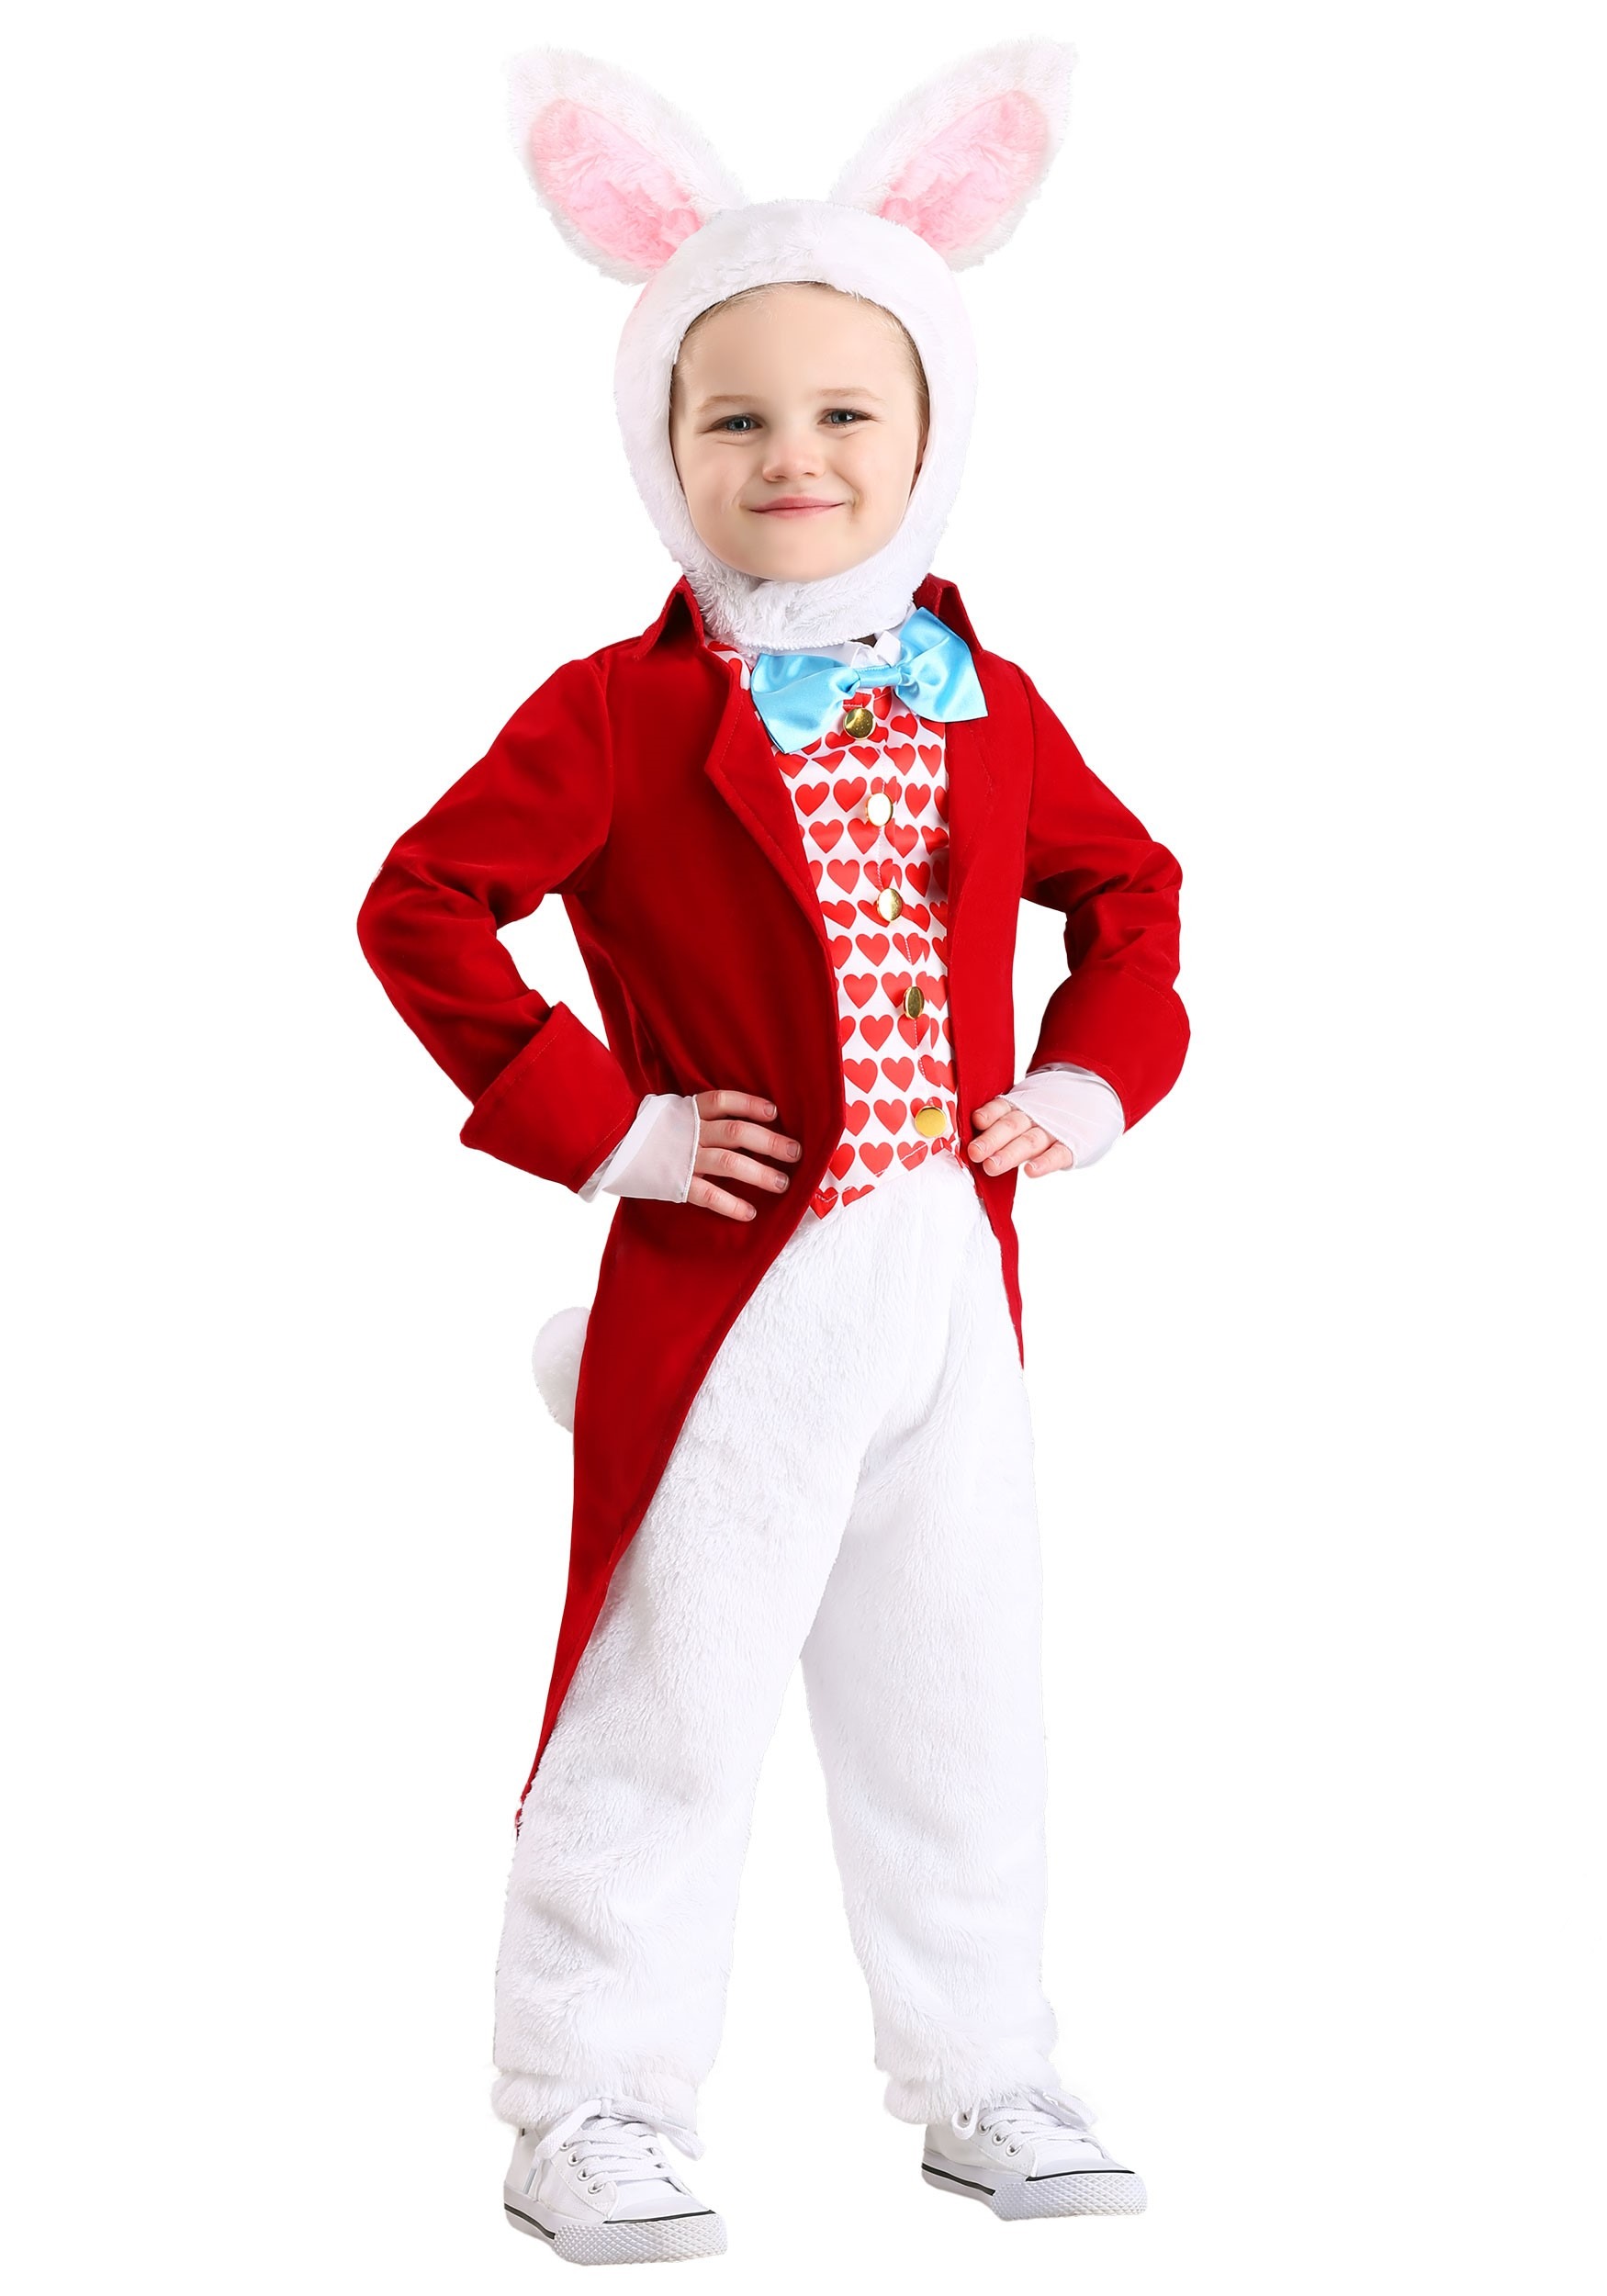 Photos - Fancy Dress Toddler FUN Costumes Dignified White Rabbit  Costume Red/Blue/White 